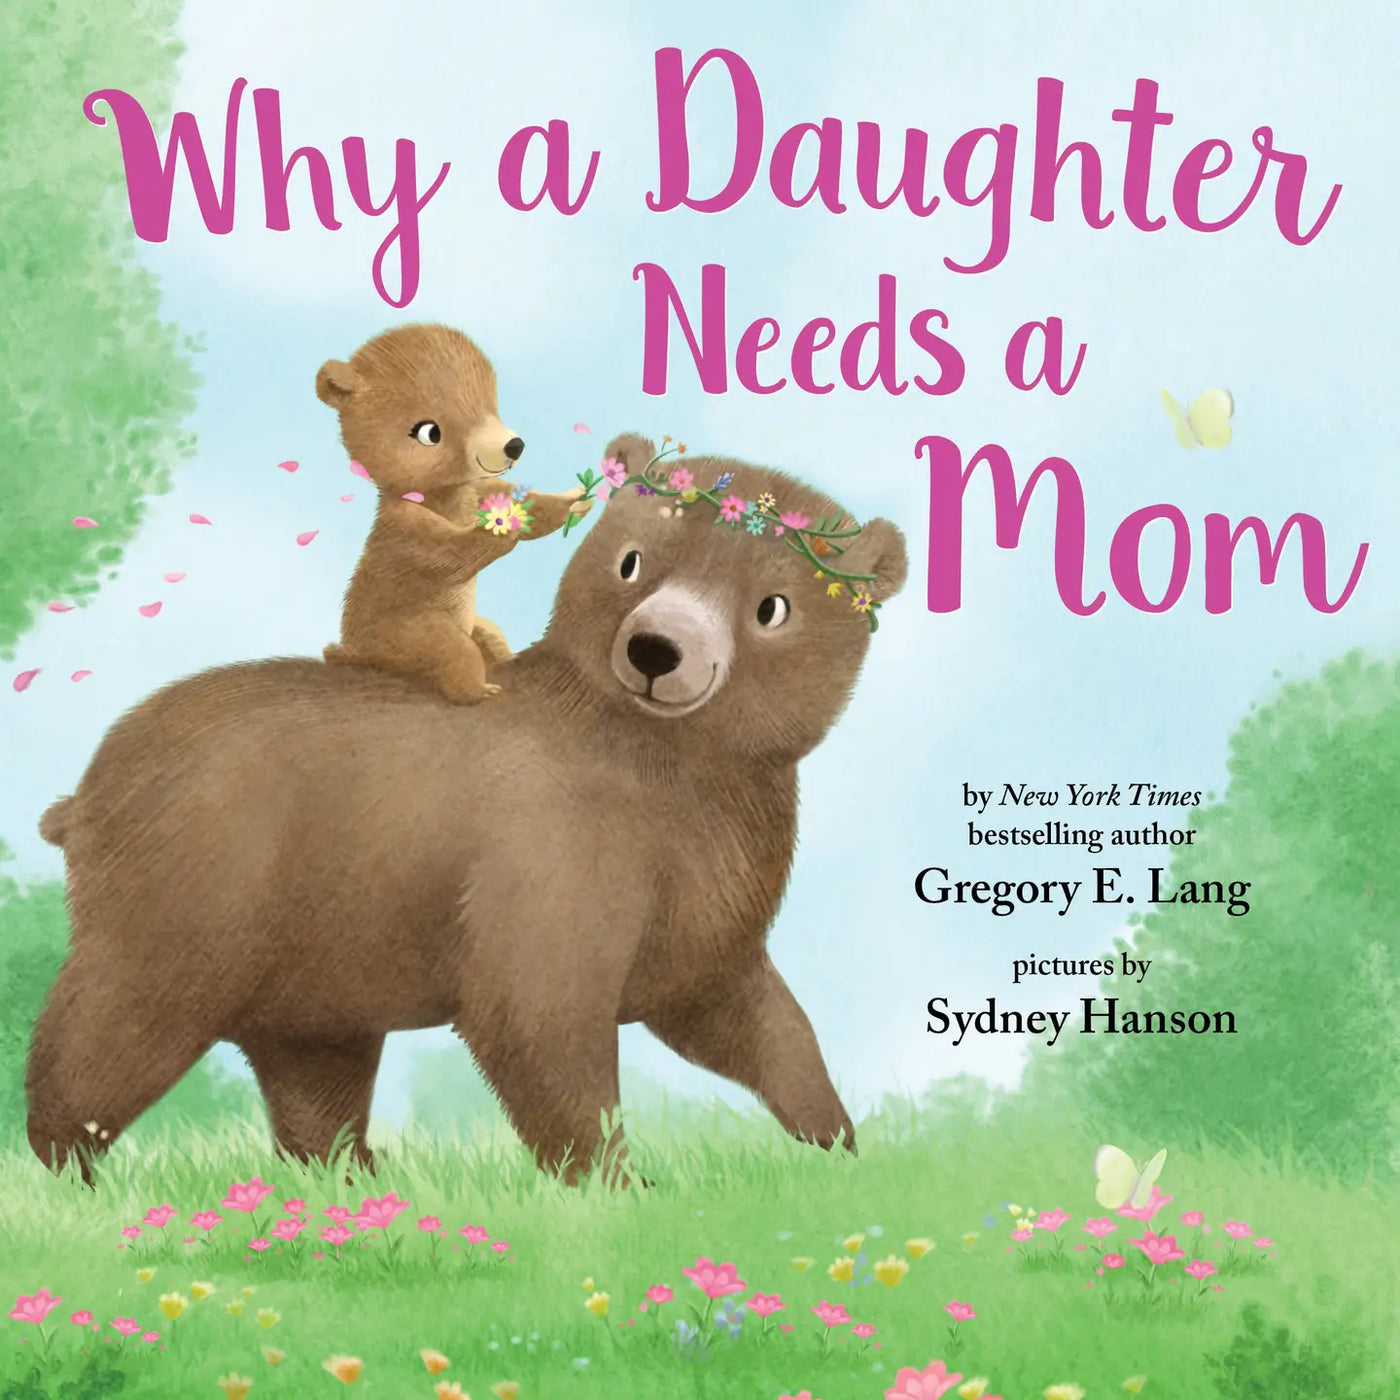 Why a Daughter/Son Needs a Mom Book